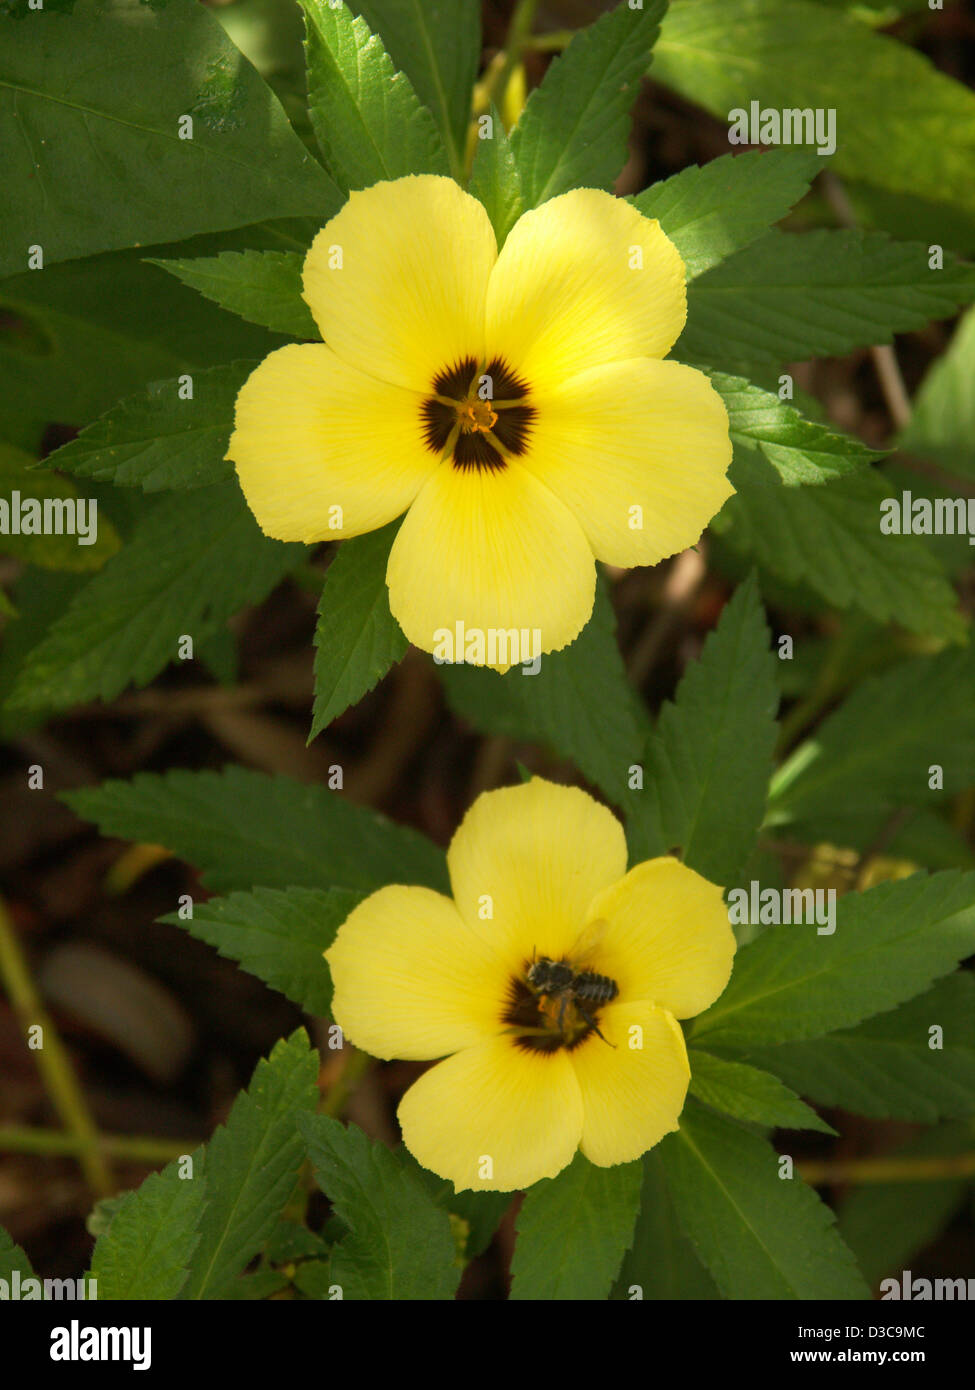 Bright yellow flowers with dark centres - of Turnera elegans 'Early Bird' - surrounded by deep green foliage Stock Photo